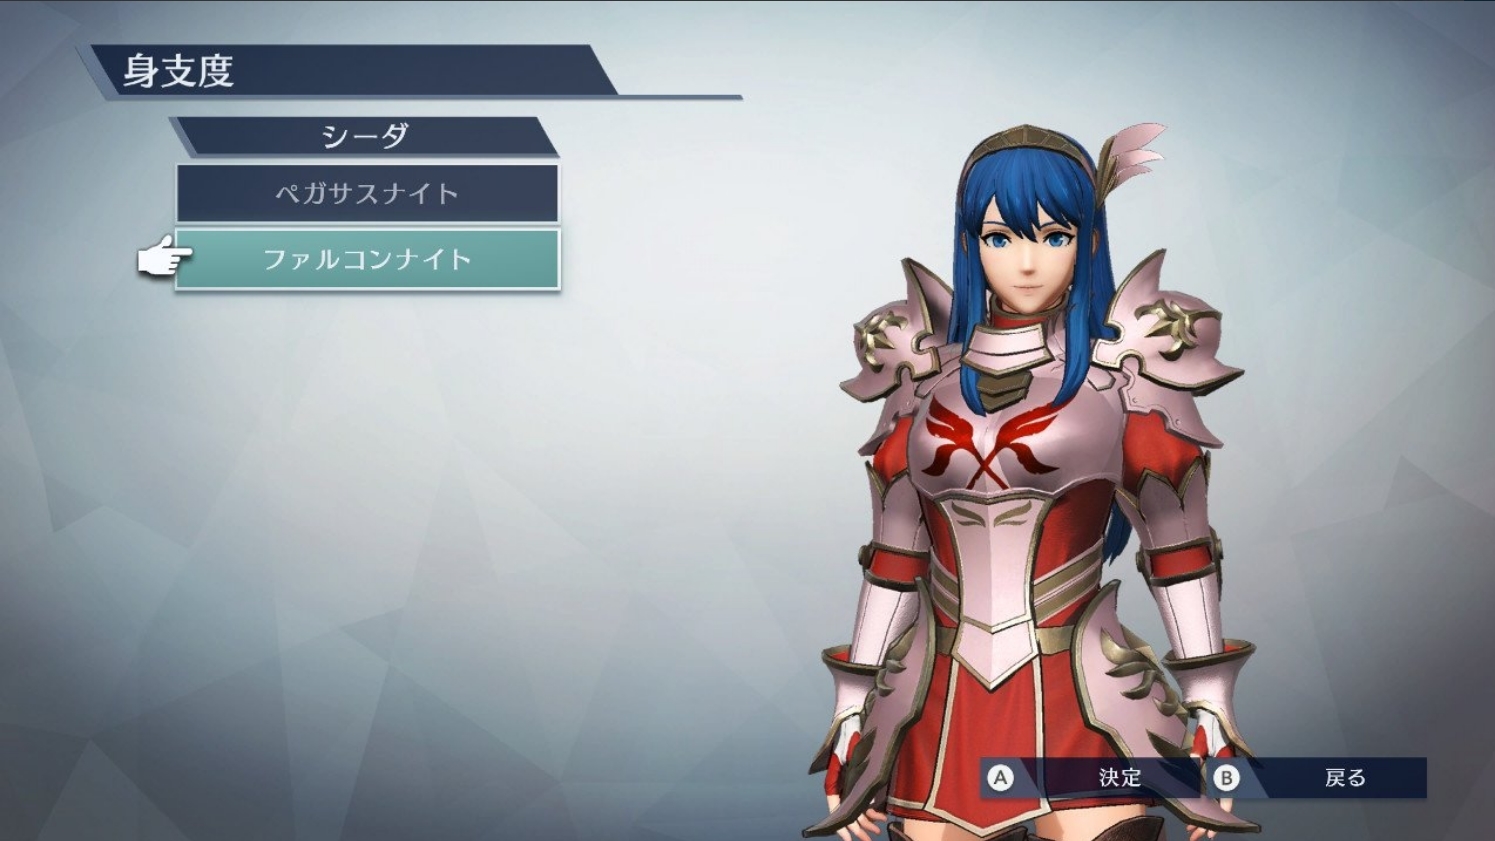 Jedi S Review Of Fire Emblem Warriors Japanese Version Serenes Forest